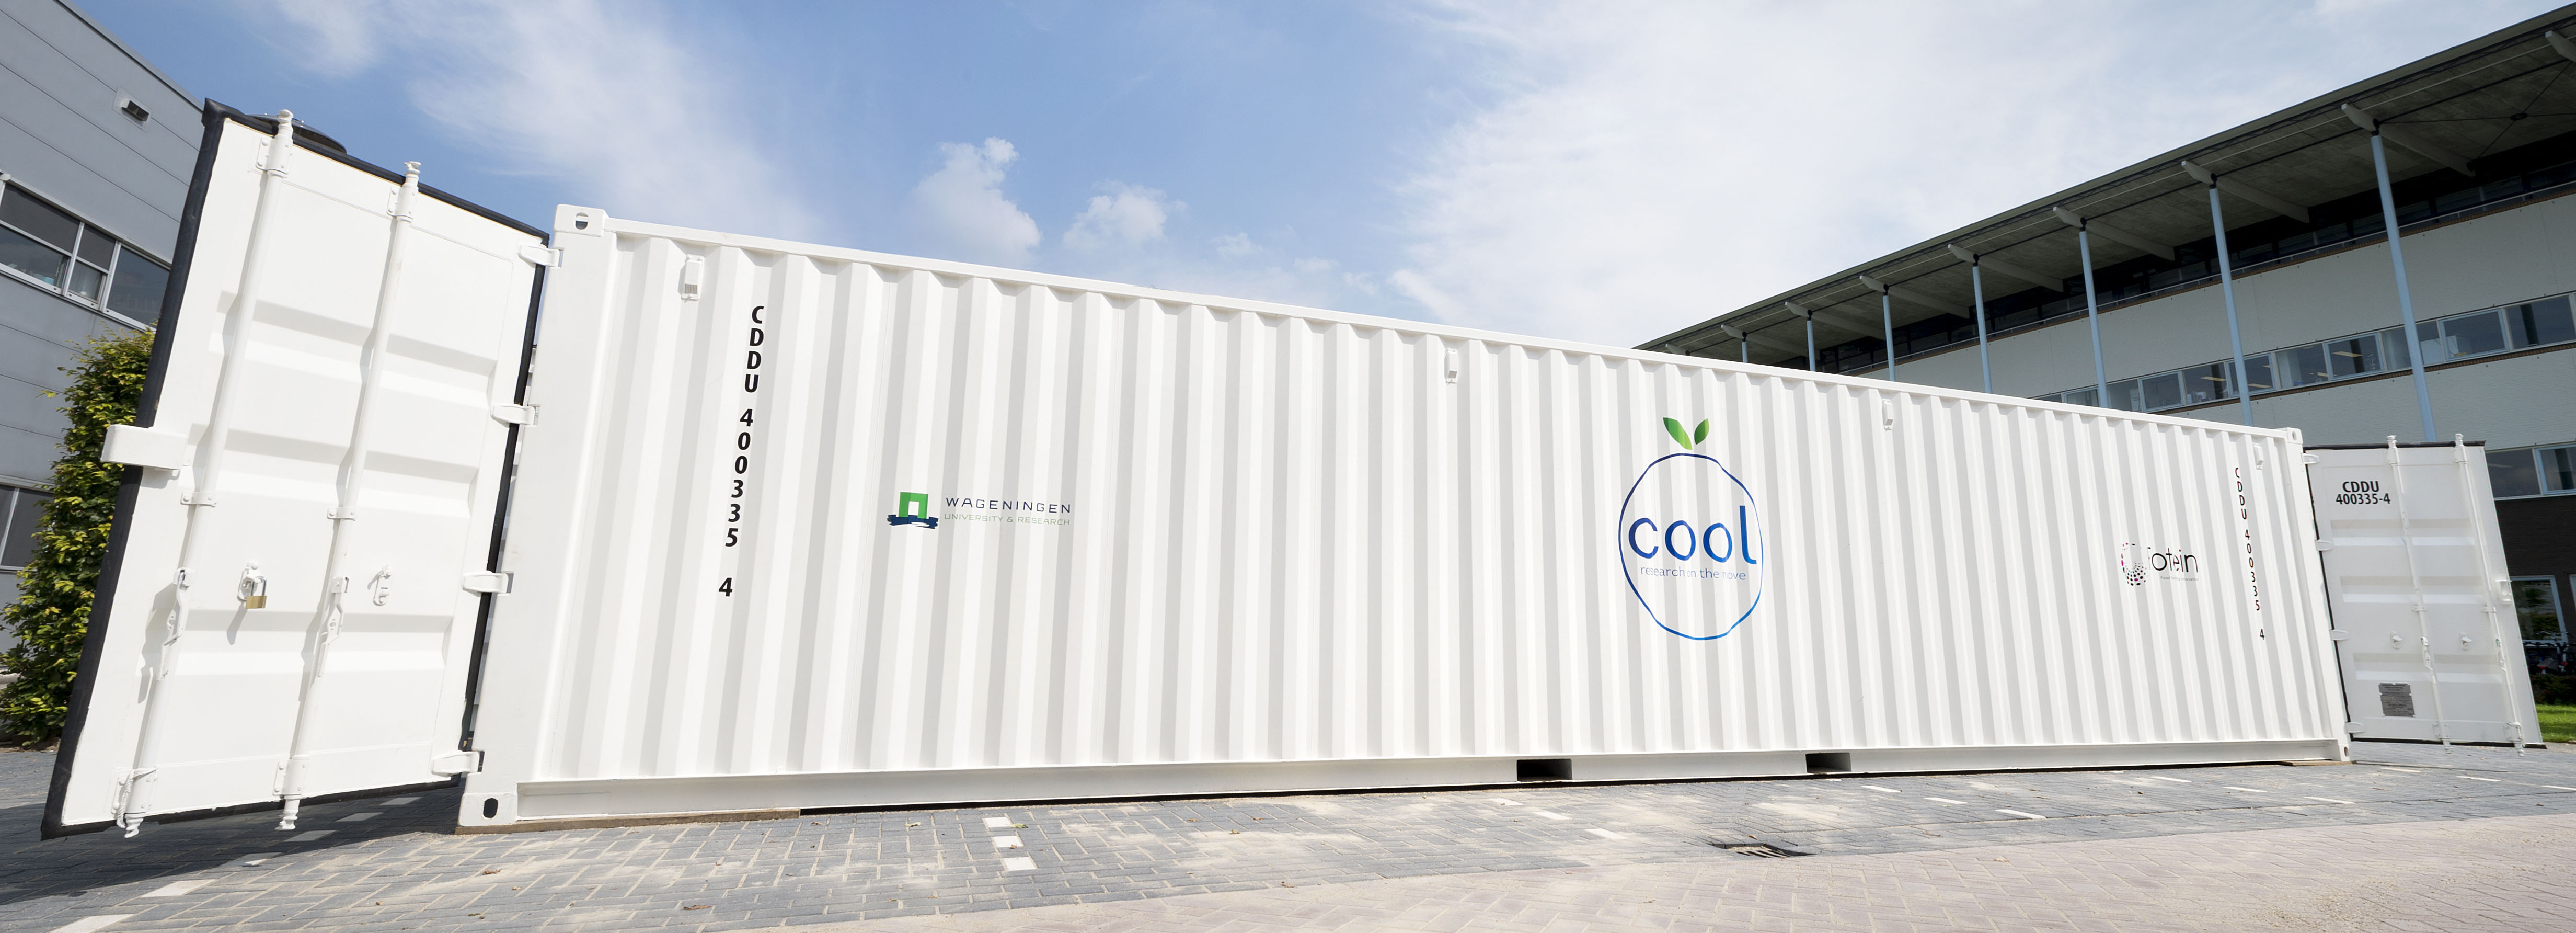 Cool - Research on the Move, a mobile research facility full of high-tech apparatus